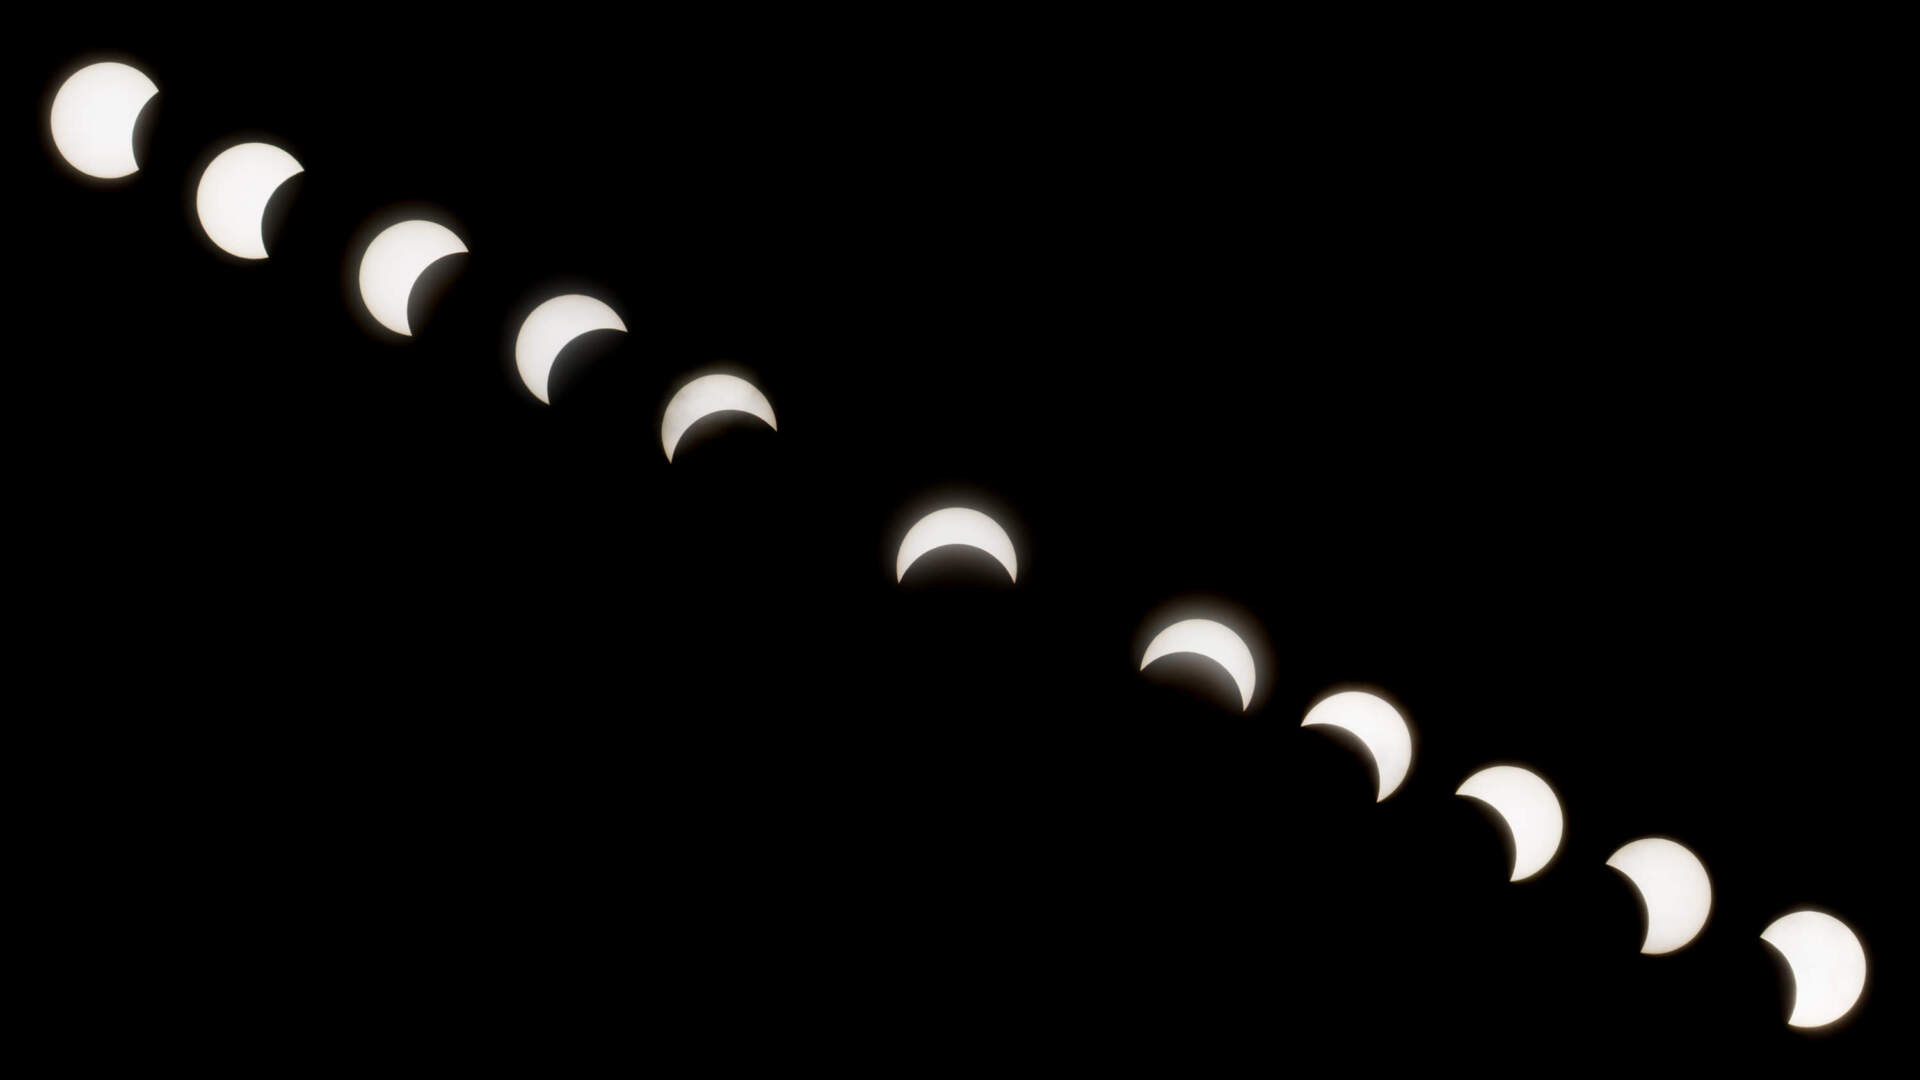 Interval of the partial solar eclipse viewed from Copley Square in Boston on Aug. 21, 2017. (Jesse Costa/WBUR)